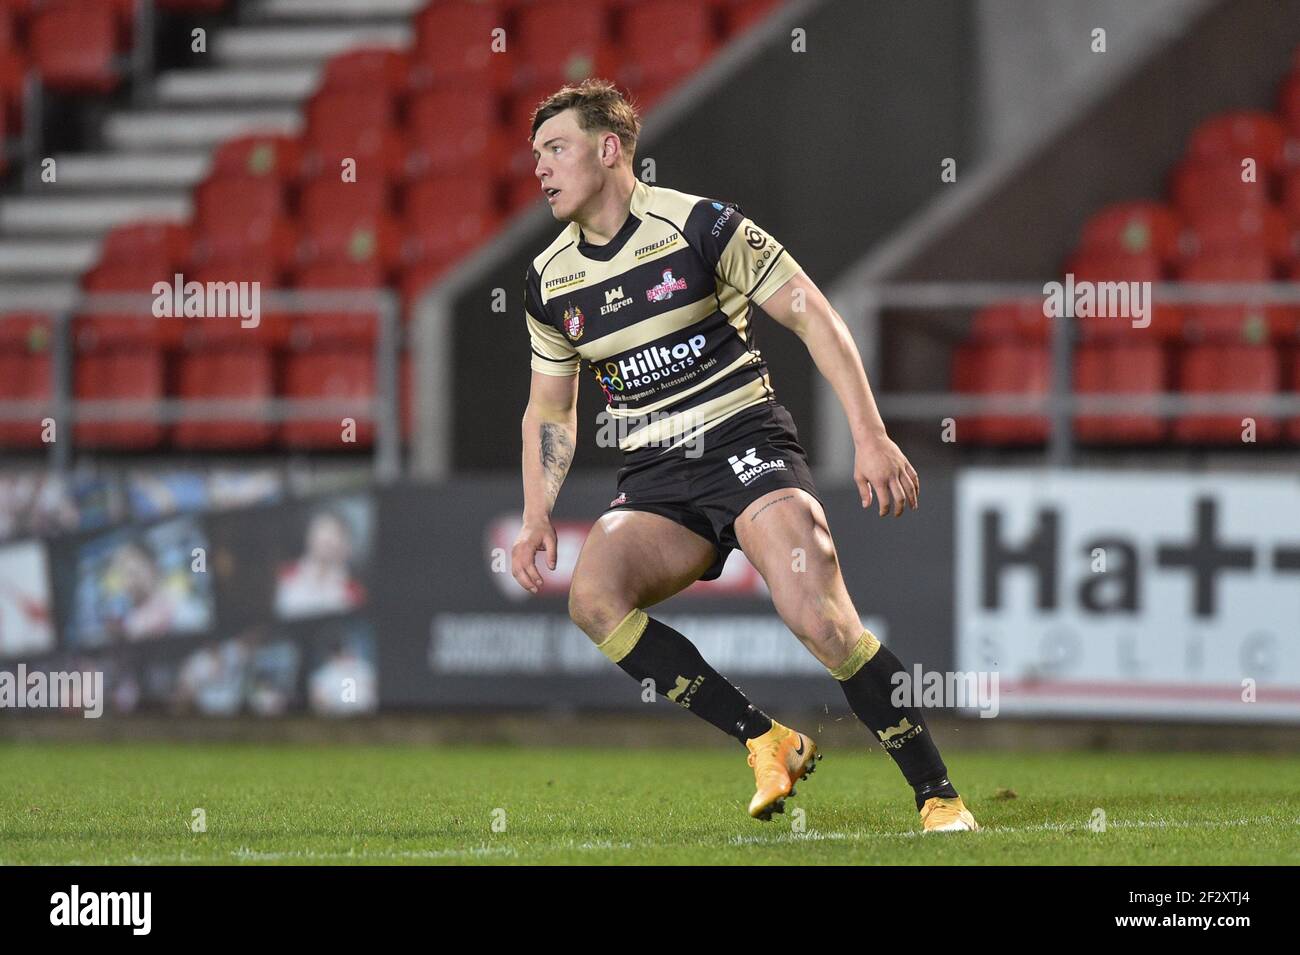 St Helens, UK. 13th Mar, 2021. Keanan Brand (24) of Leigh Centurions during the game in St Helens, UK on 3/13/2021. (Photo by Richard Long/News Images/Sipa USA) Credit: Sipa USA/Alamy Live News Stock Photo